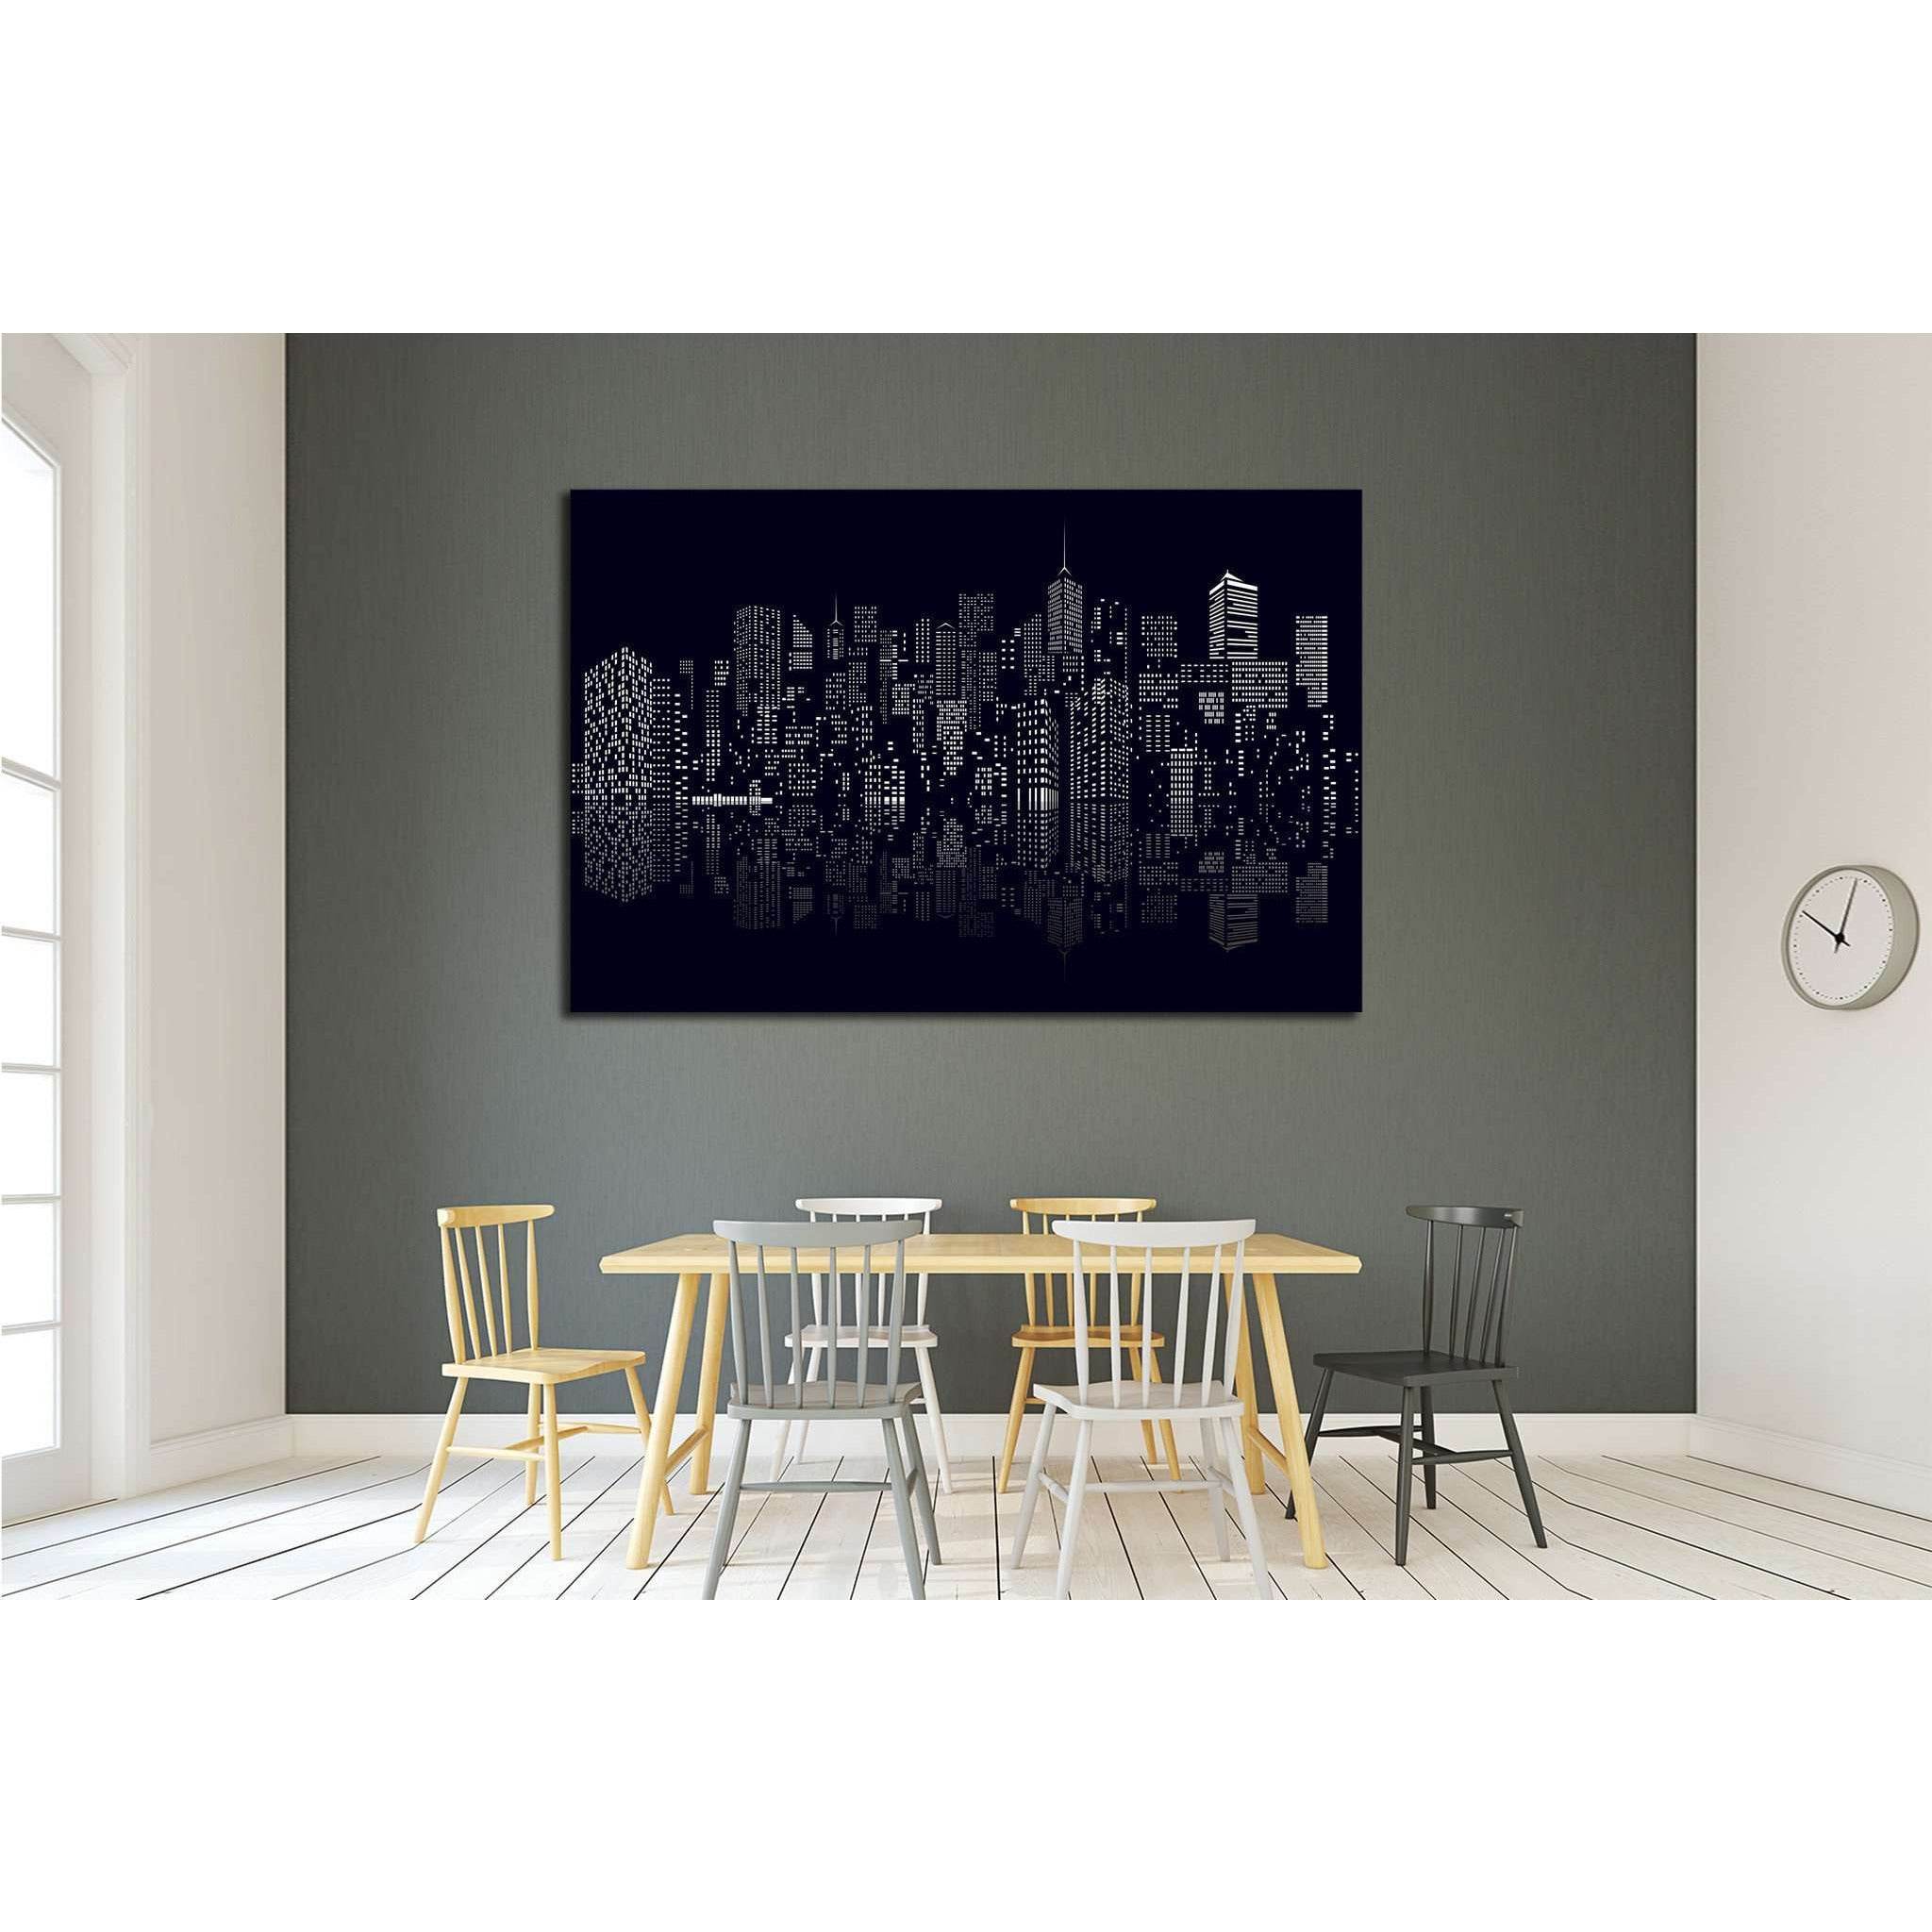 windows on abstract city skylines in black and white №1926 Ready to Hang Canvas Print